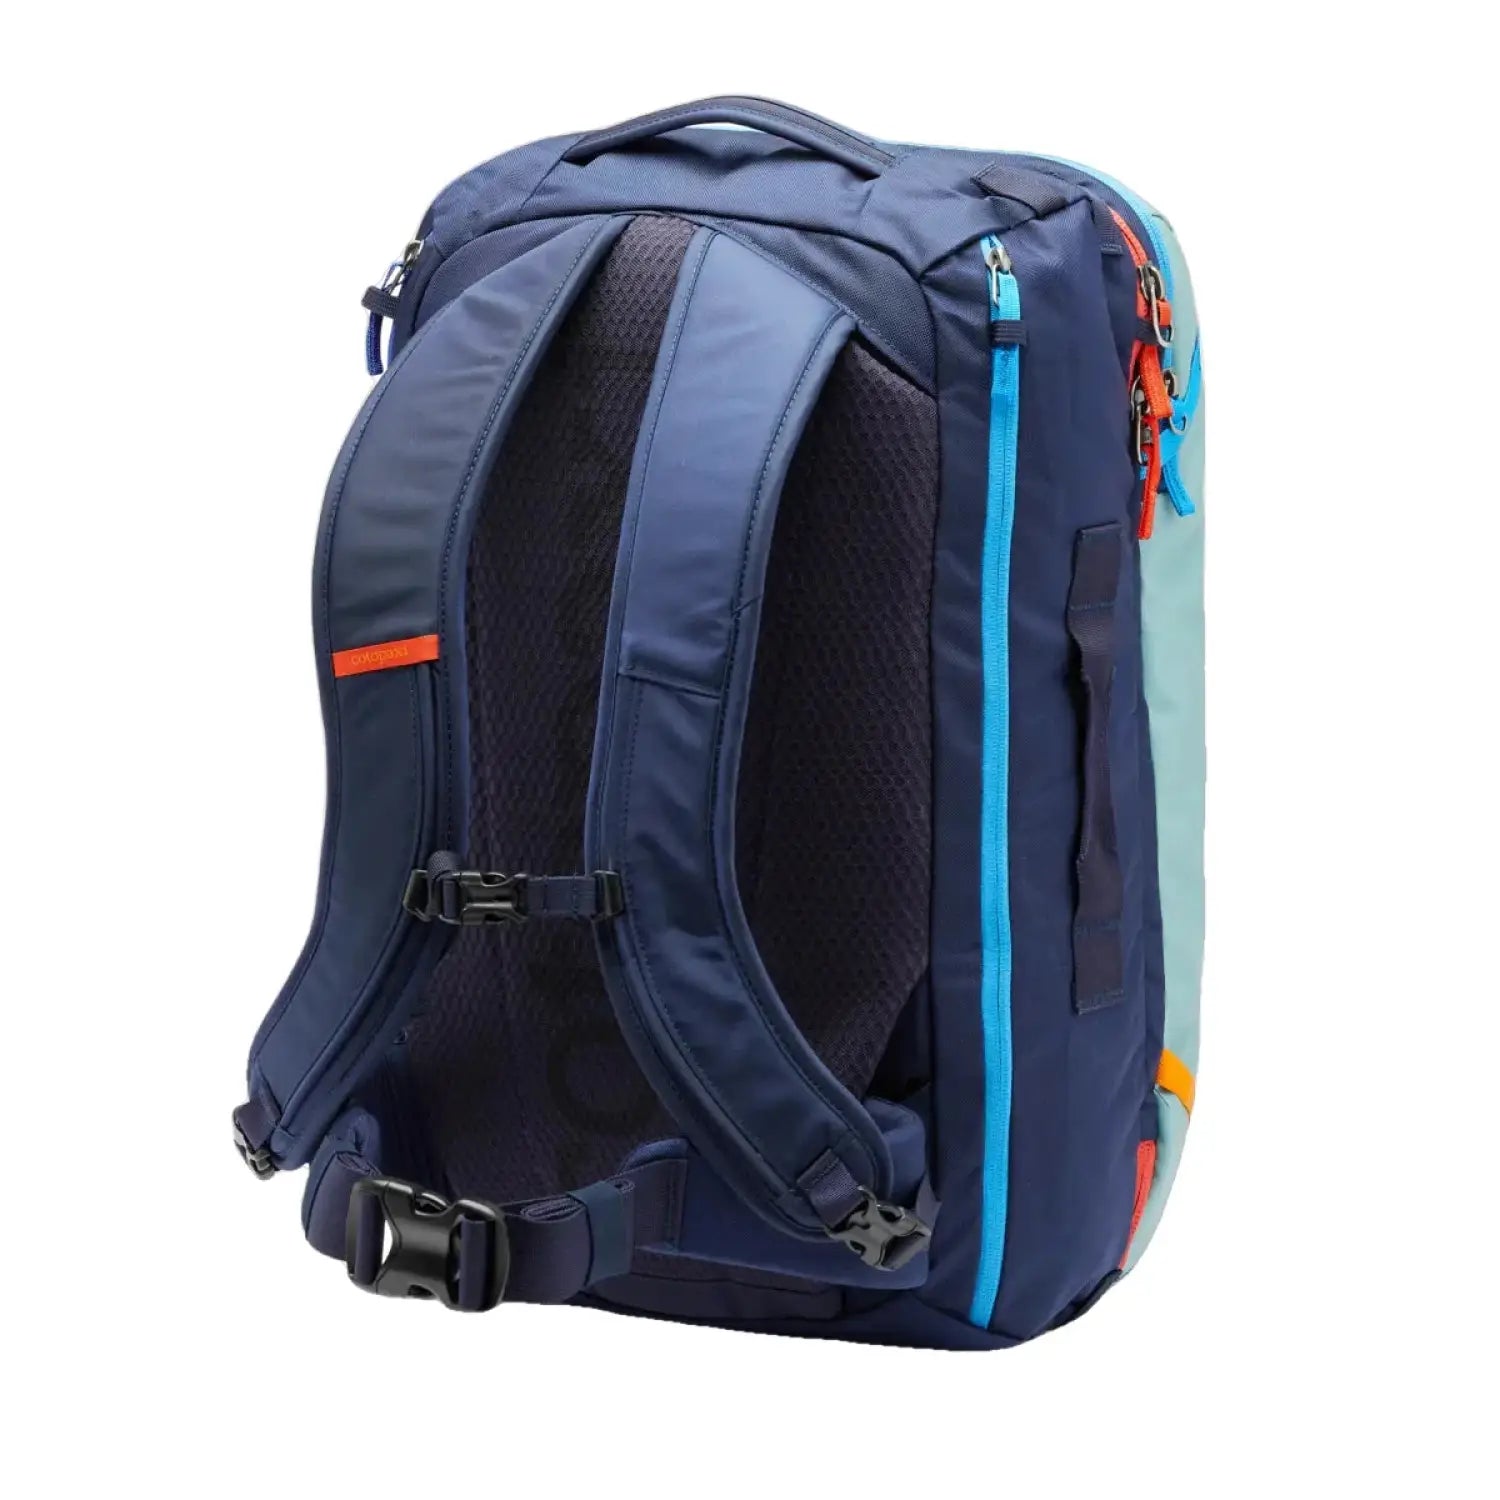 Cotopaxi Allpa 35L Travel Pack shown in Bluegrass.  Back view. 